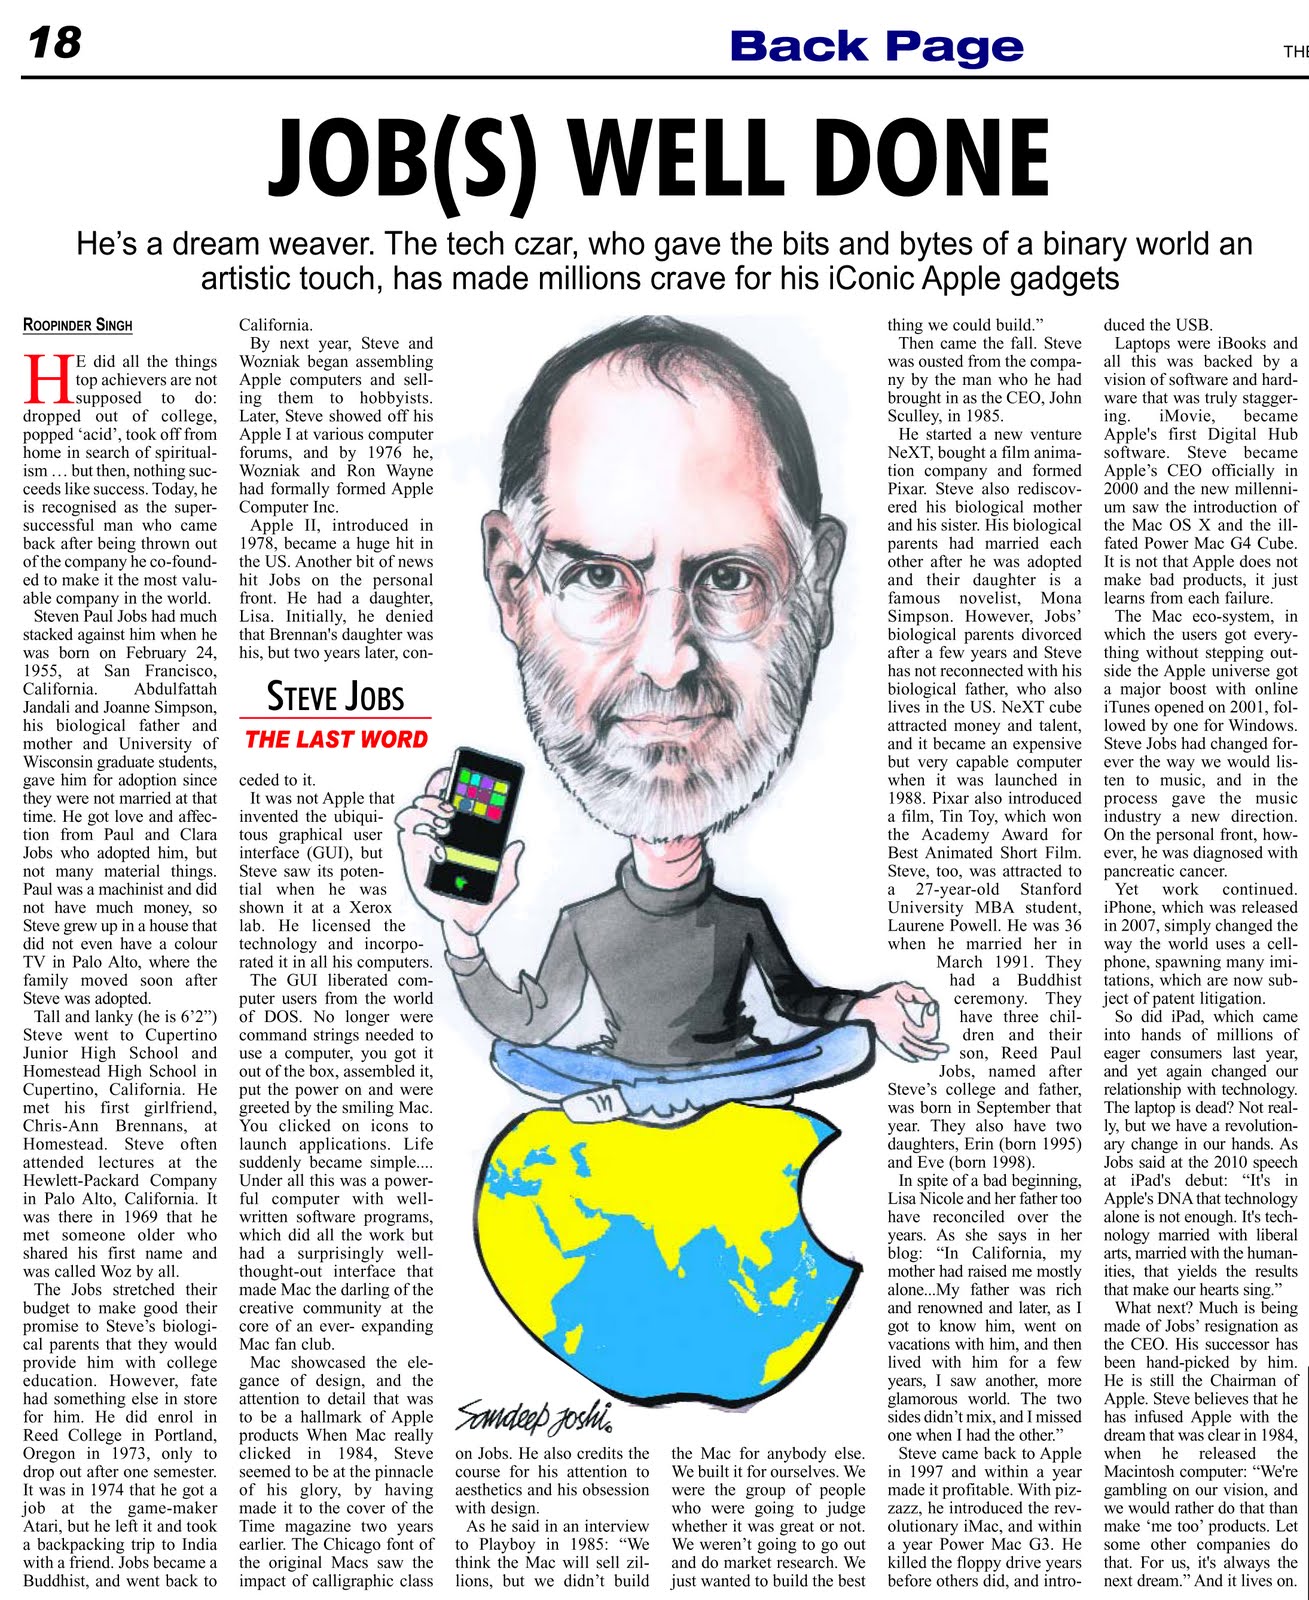 The Last Word column on Steve Jobs published in The Tribune on Monday, August 29, 2011